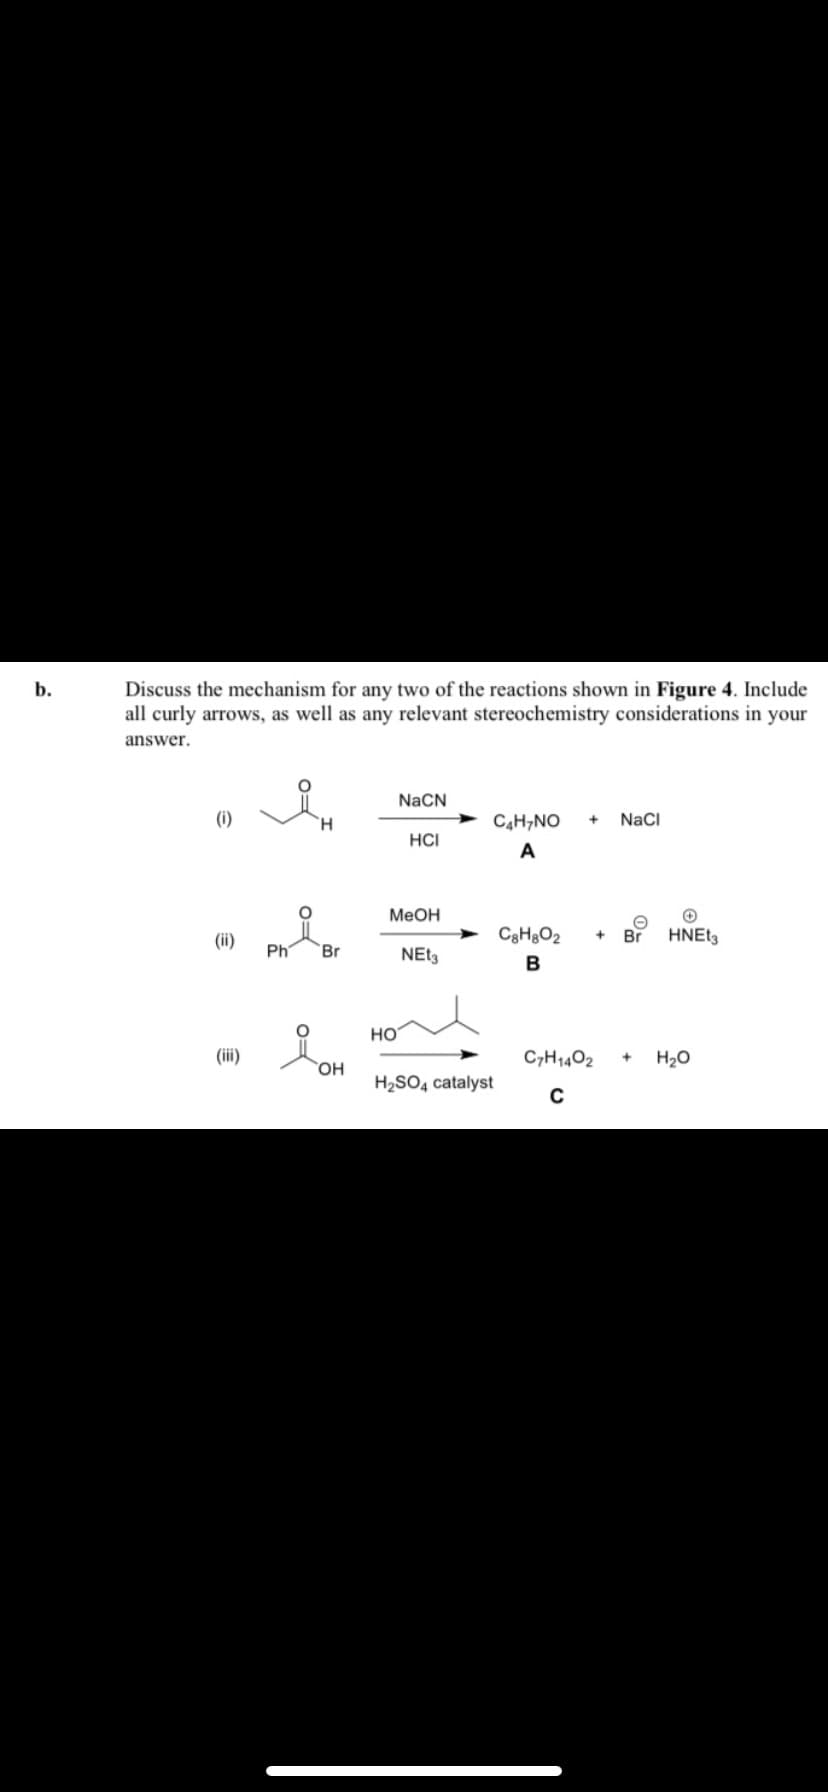 b.
Discuss the mechanism for any two of the reactions shown in Figure 4. Include
all curly arrows, as well as any relevant stereochemistry considerations in your
answer.
(i)
(ii)
(iii)
H
Ph Br
OH
NaCN
HO
HCI
MeOH
NEt3
C4H7NO + NaCl
A
H₂SO4 catalyst
C8H8O2 + Br
B
✪
HNEt3
C7H1402 + H₂O
C